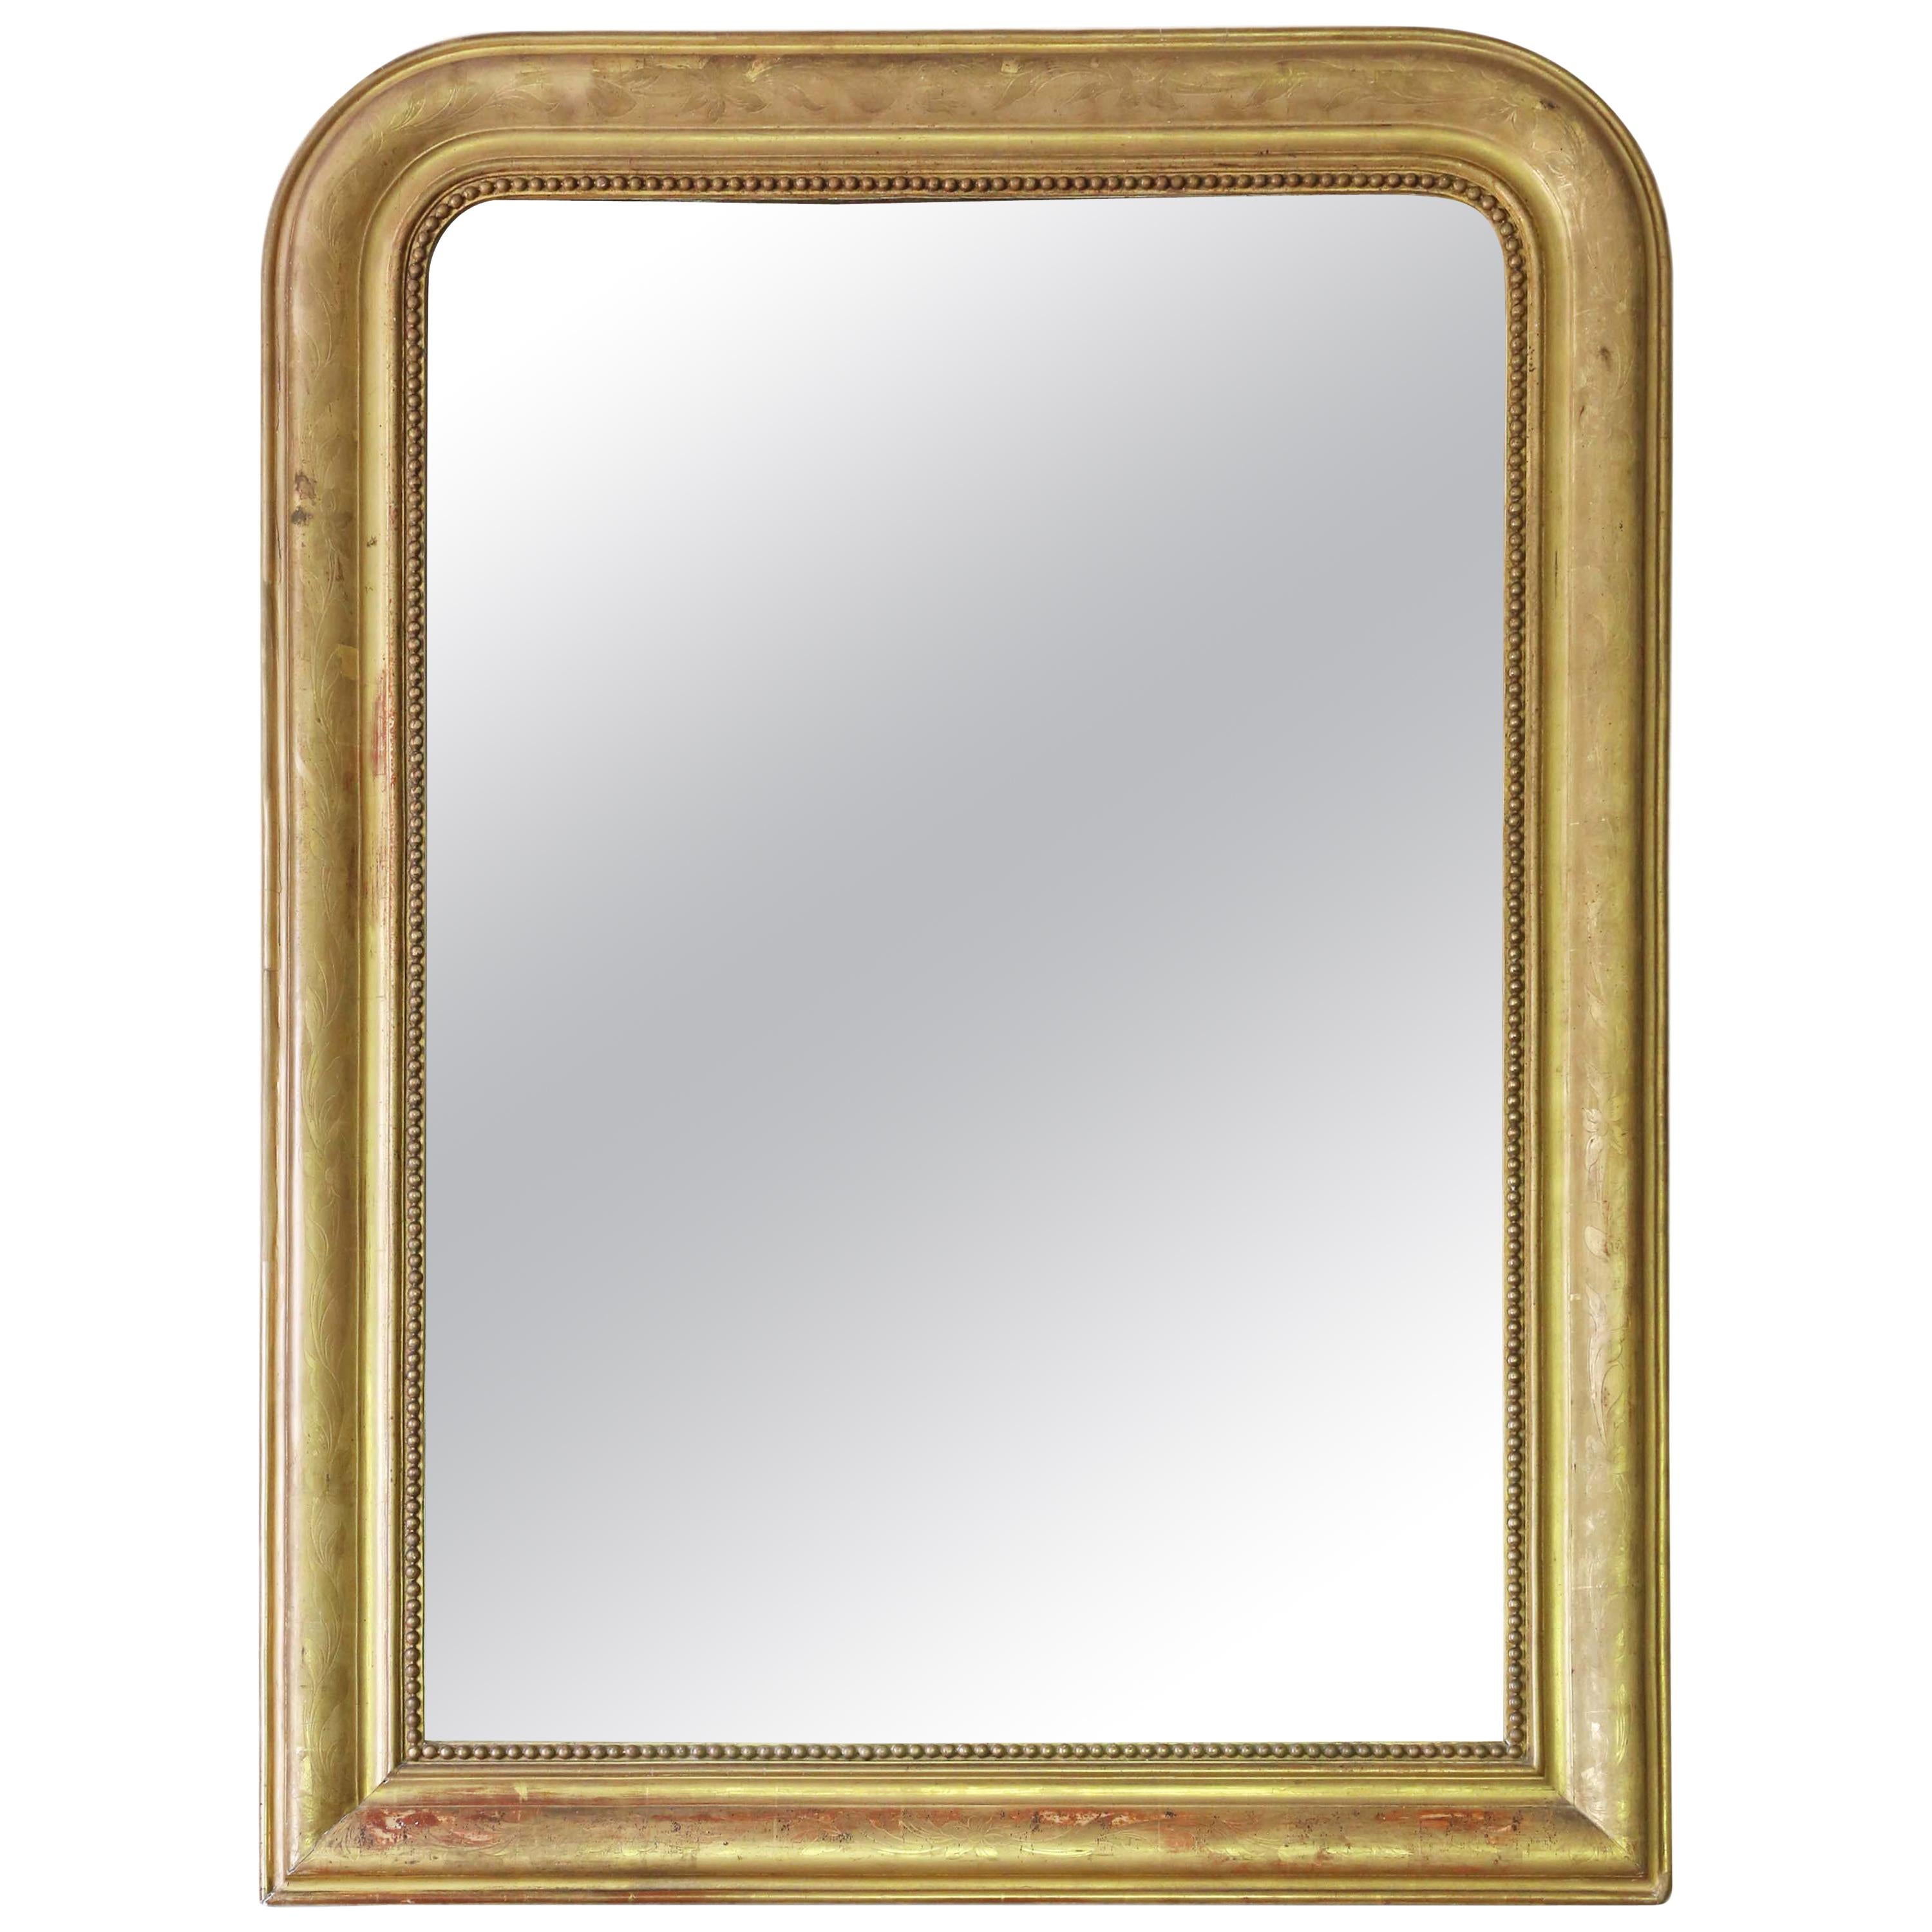 Victorian Gilt Overmantle or Wall Mirror